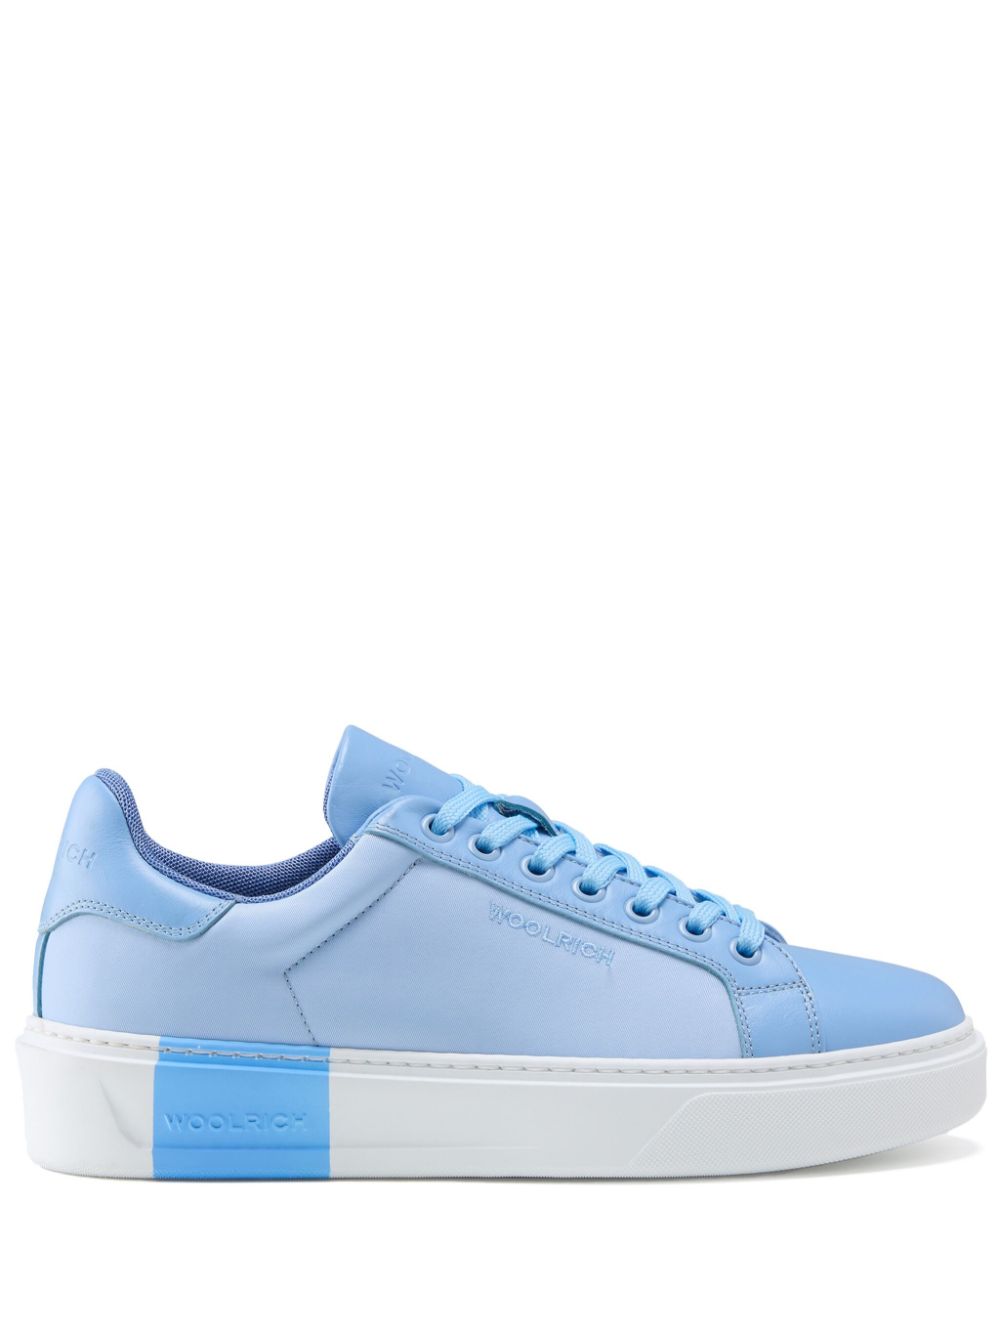 Woolrich panelled lace-up sneakers - Blue von Woolrich